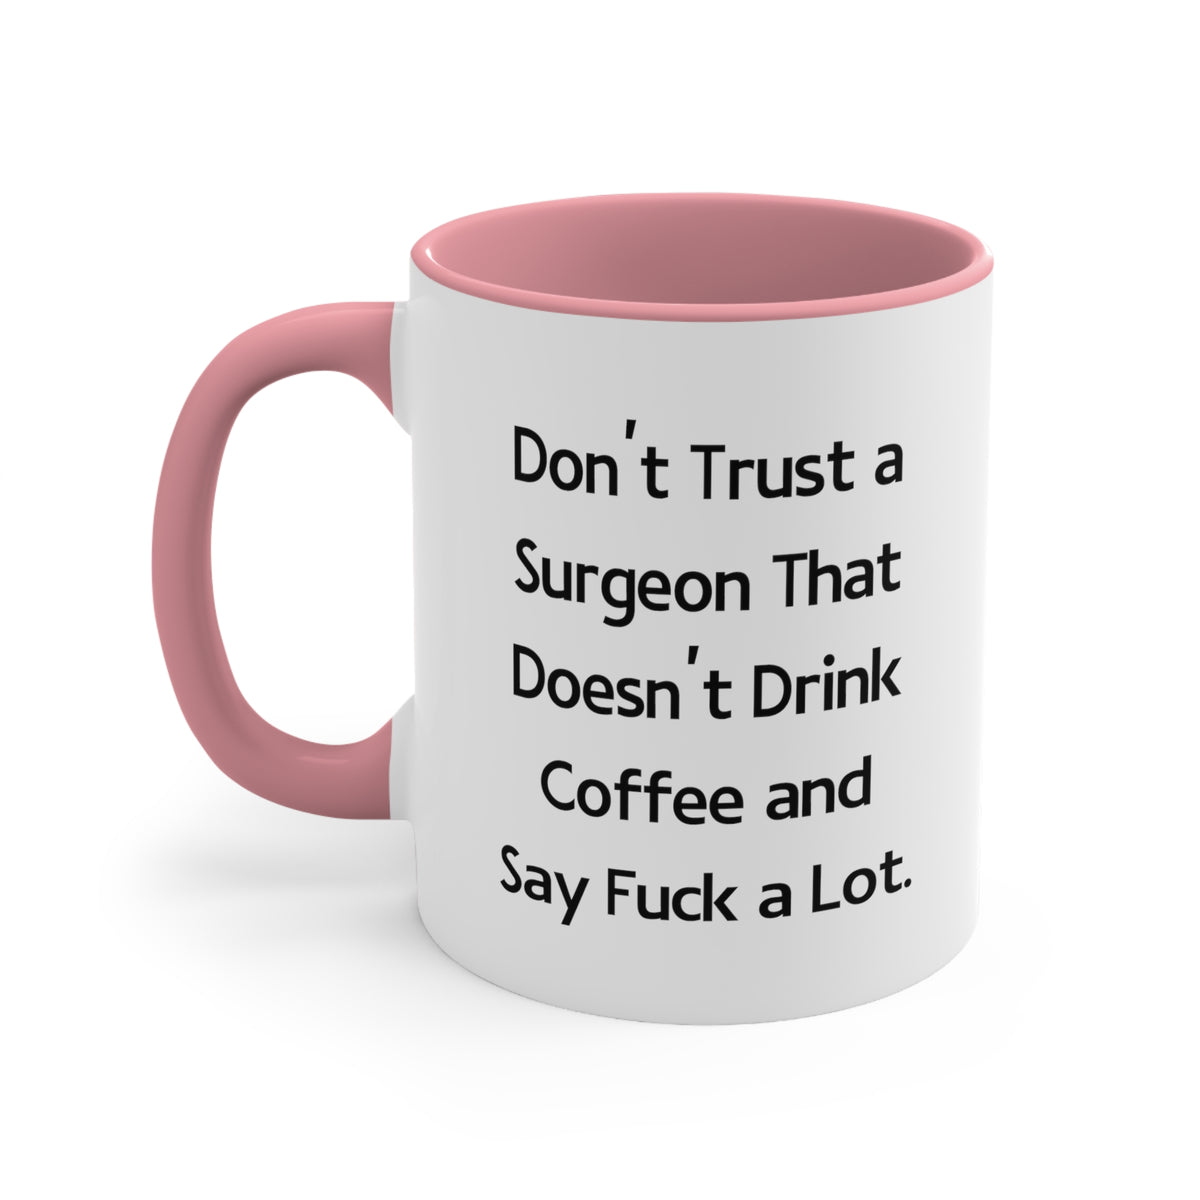 Cool Surgeon, Don't Trust a Surgeon That Doesn't Drink Coffee and Say Fuck a Lot, Birthday Two Tone 11oz Mug For Surgeon